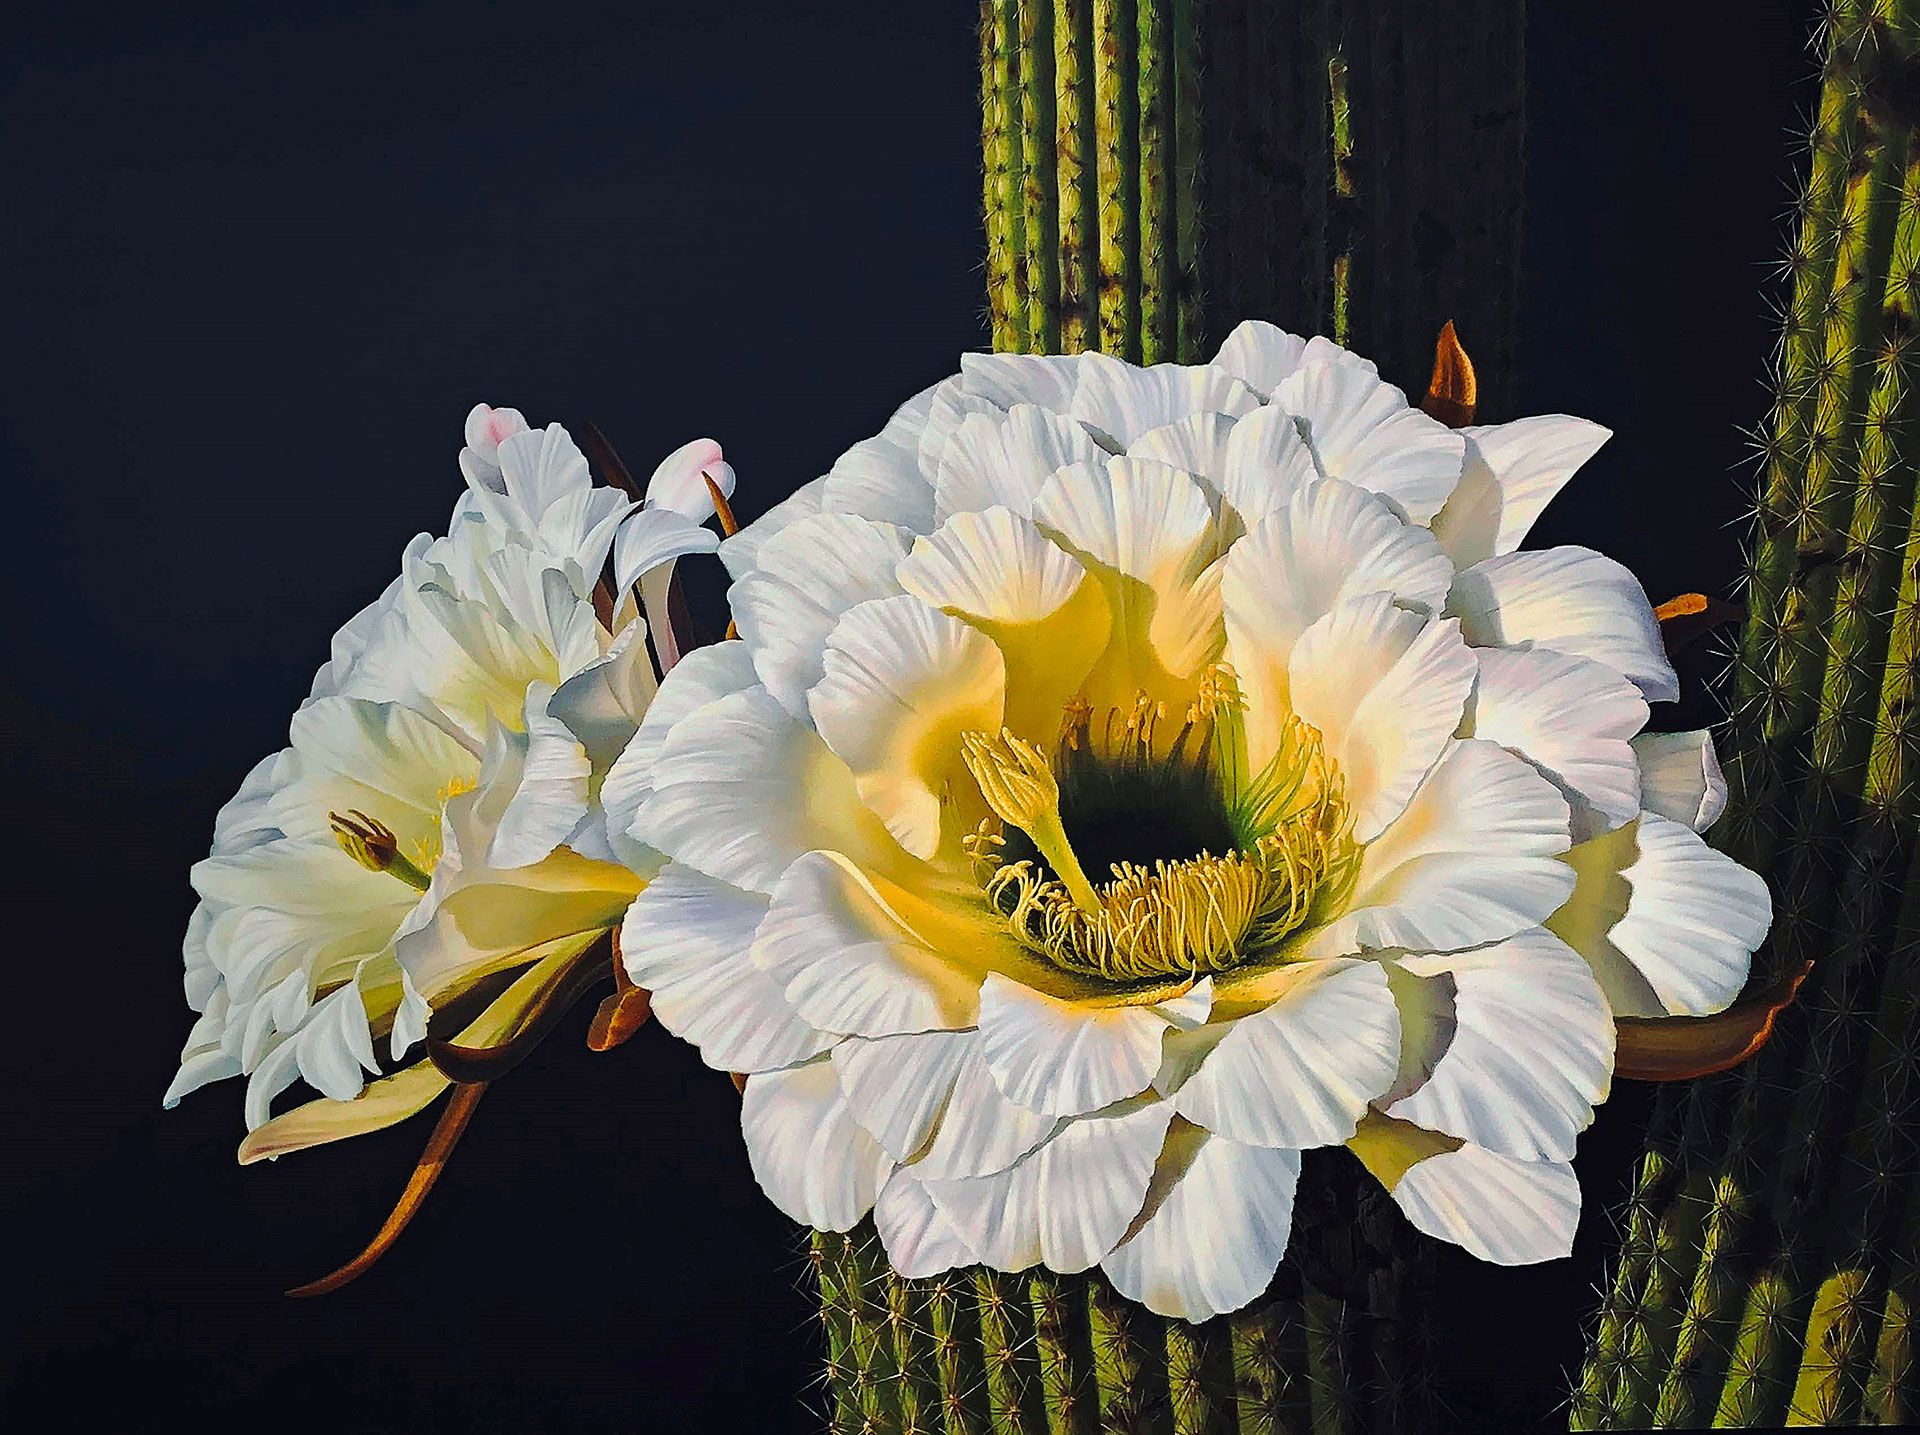 Photorealistic painting of a saguaro cactus bloom